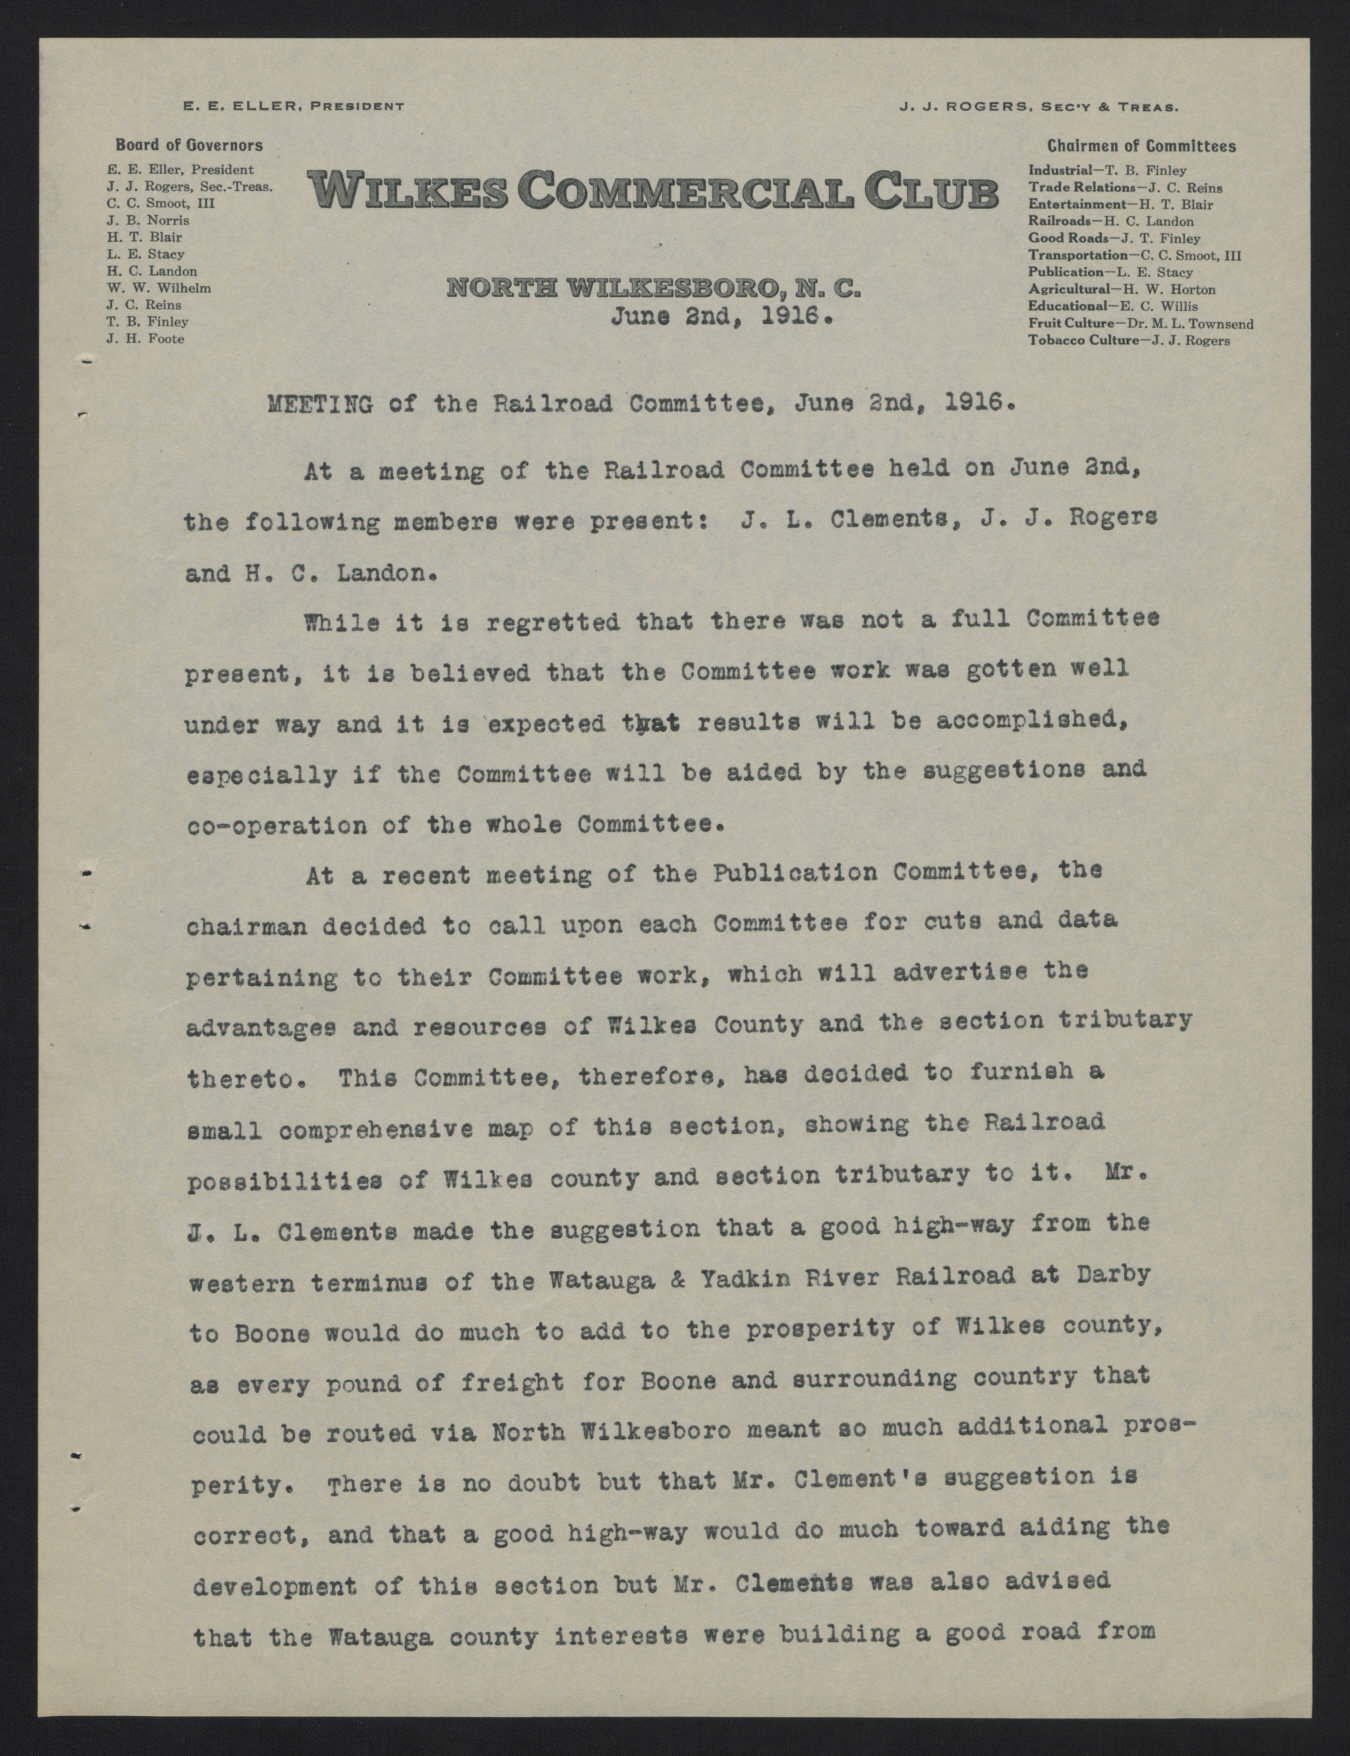 Report of the Wilkes Commercial Club Railroad Committee, 2 June 1916, page 2